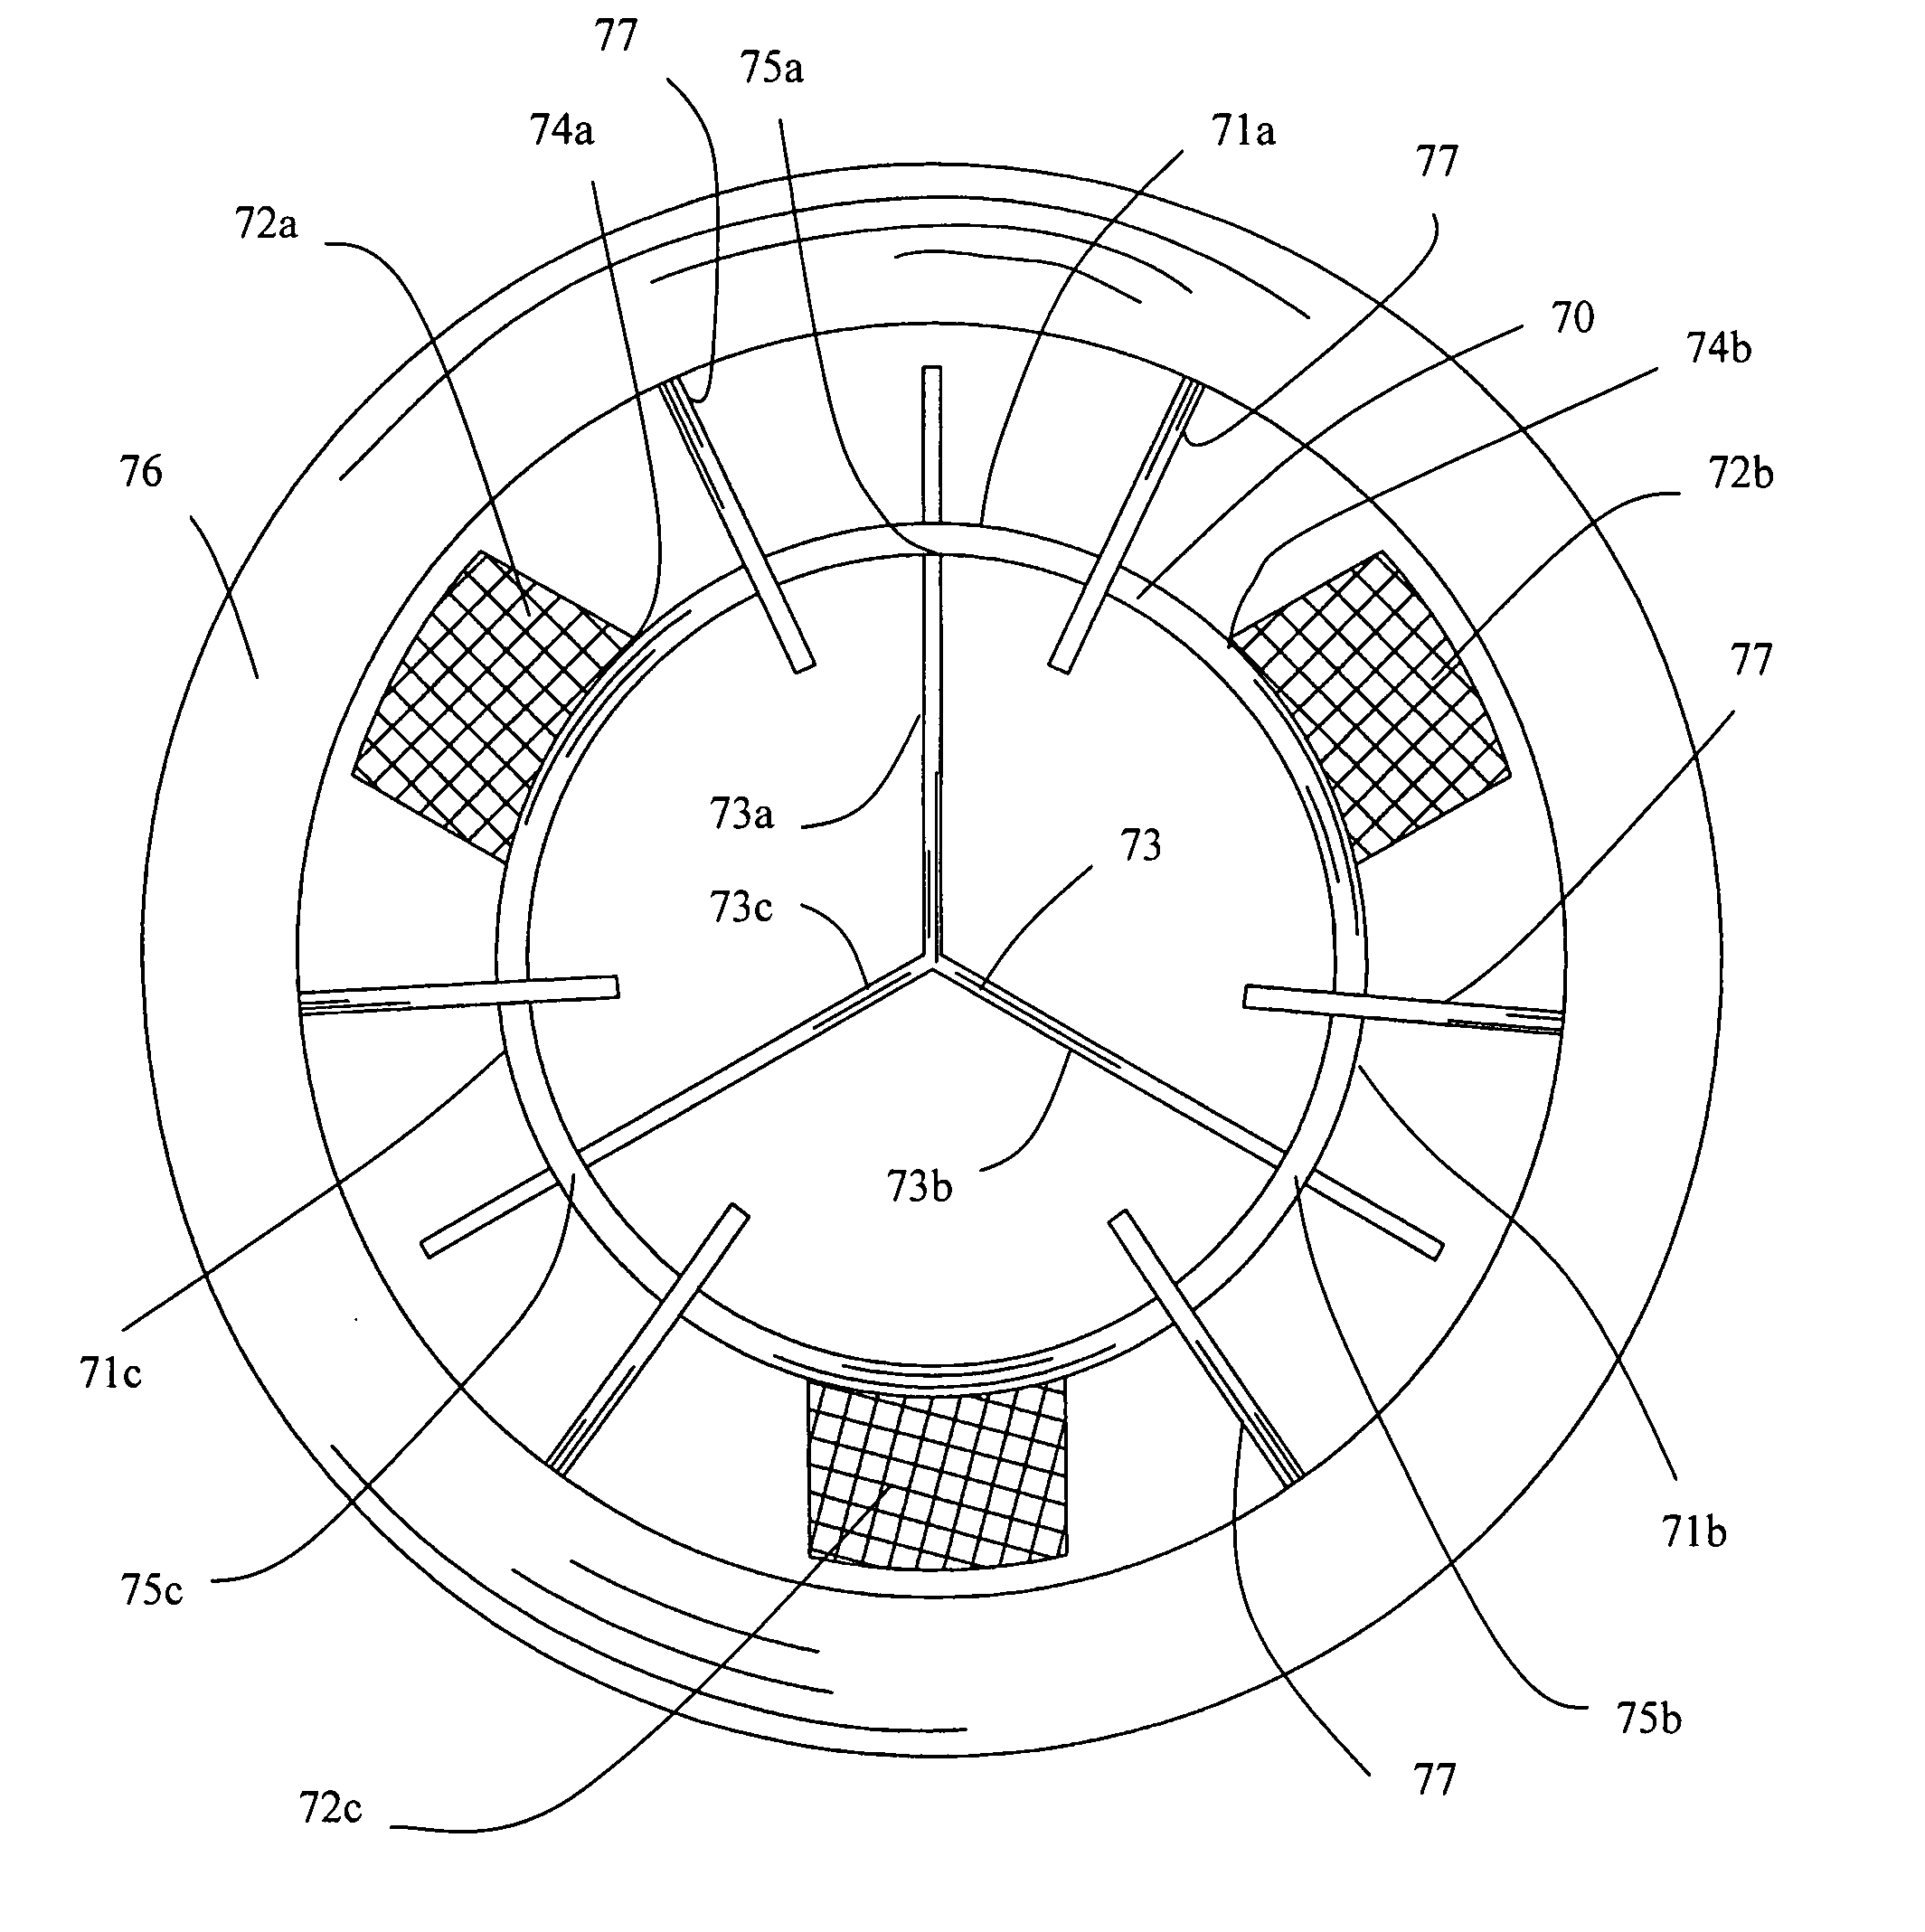 Self-expanding valve for the venous system